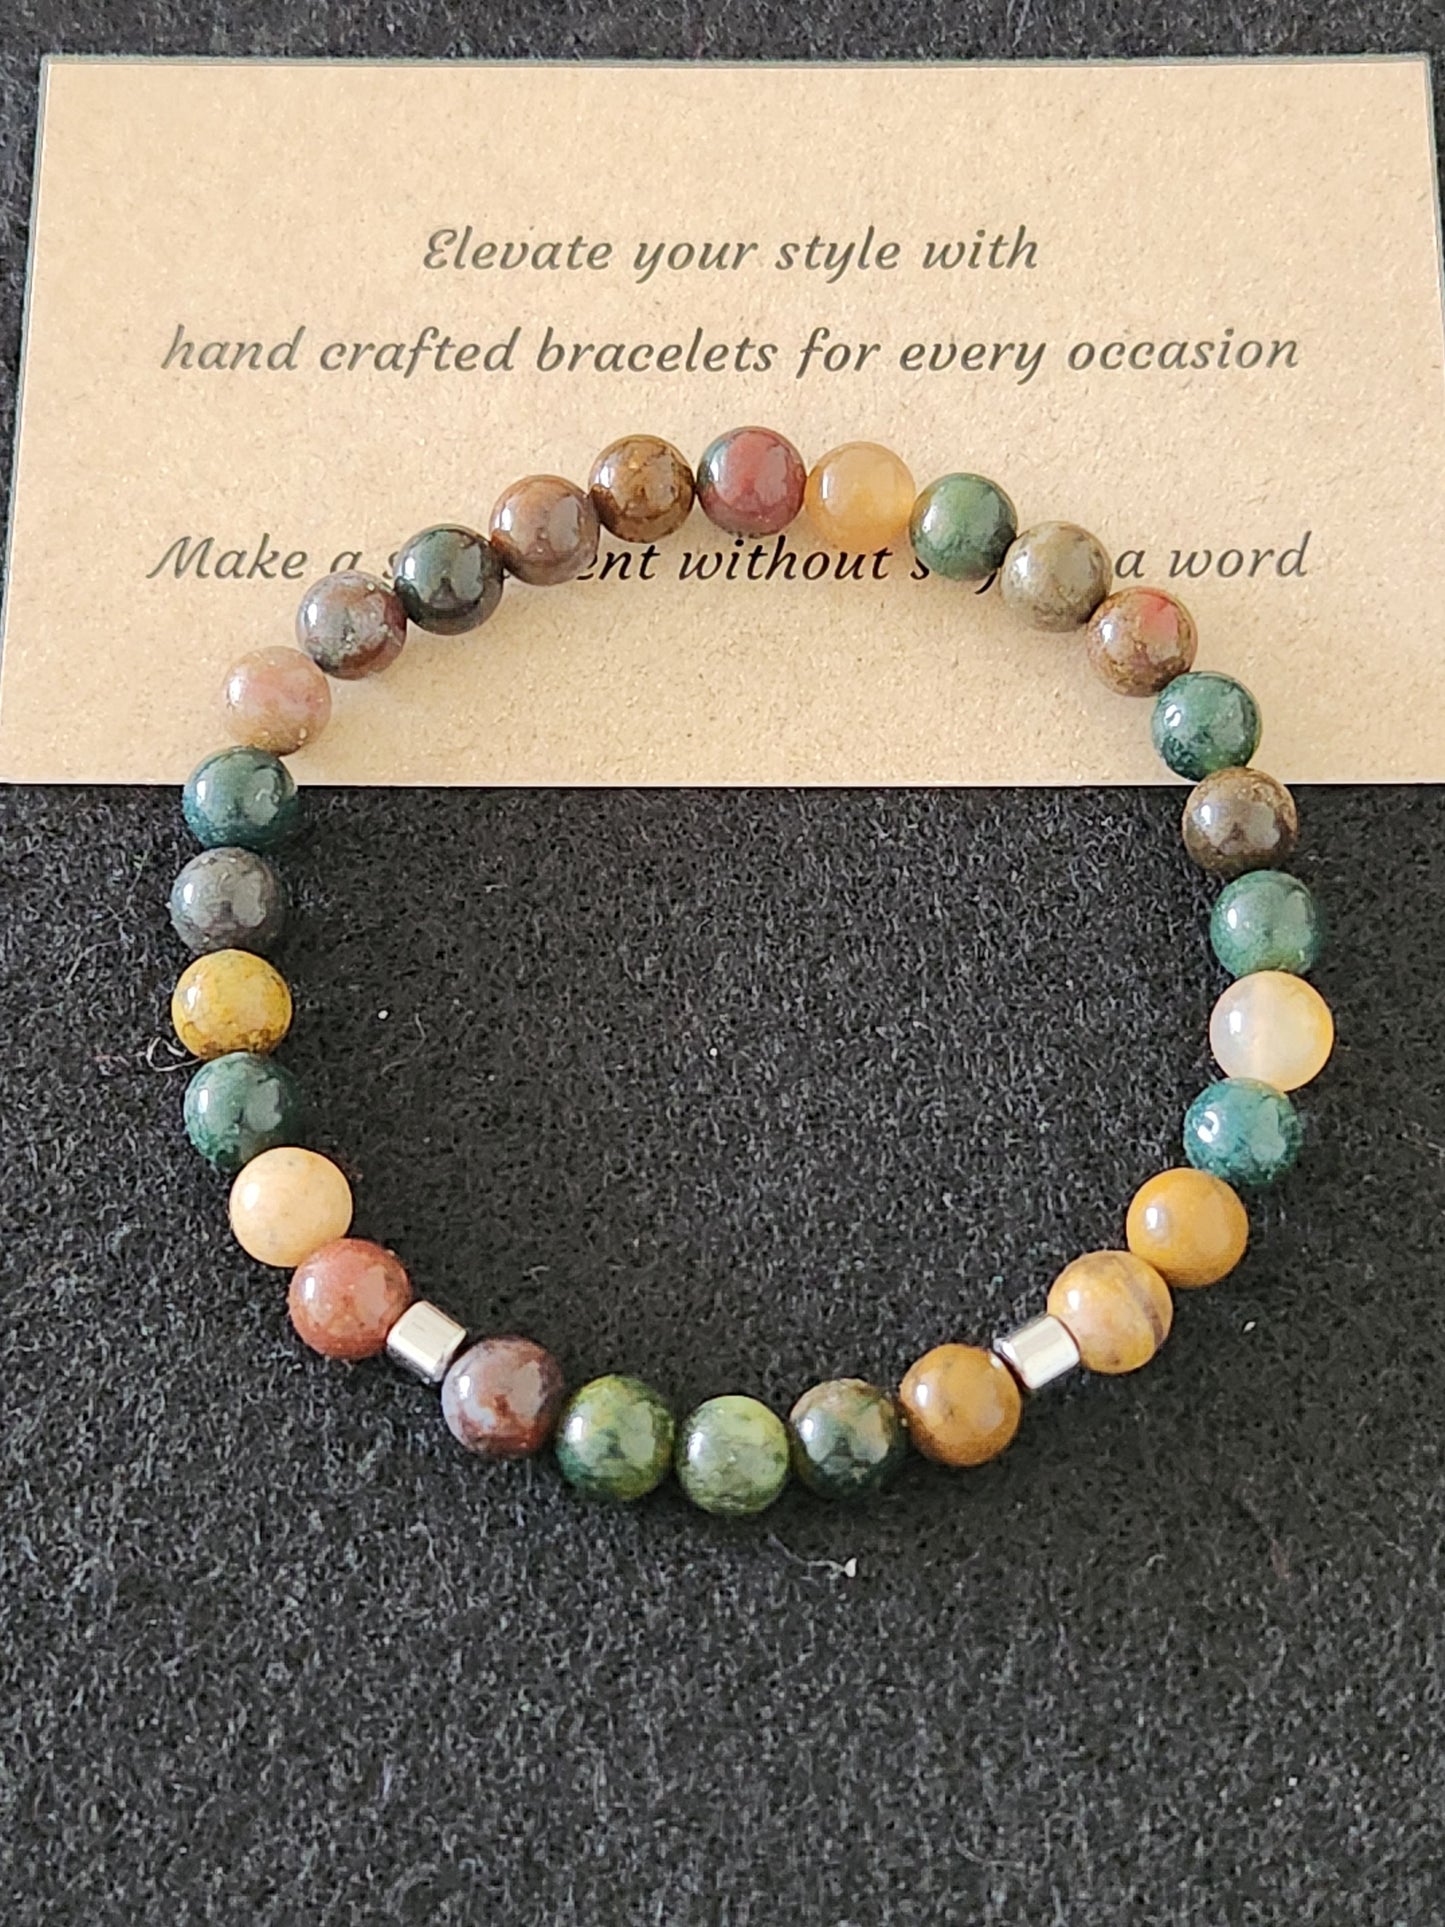 Ocean Jade Stone Bracelet with accents - 6mm stones - purity - calming - tranquillity - comforting